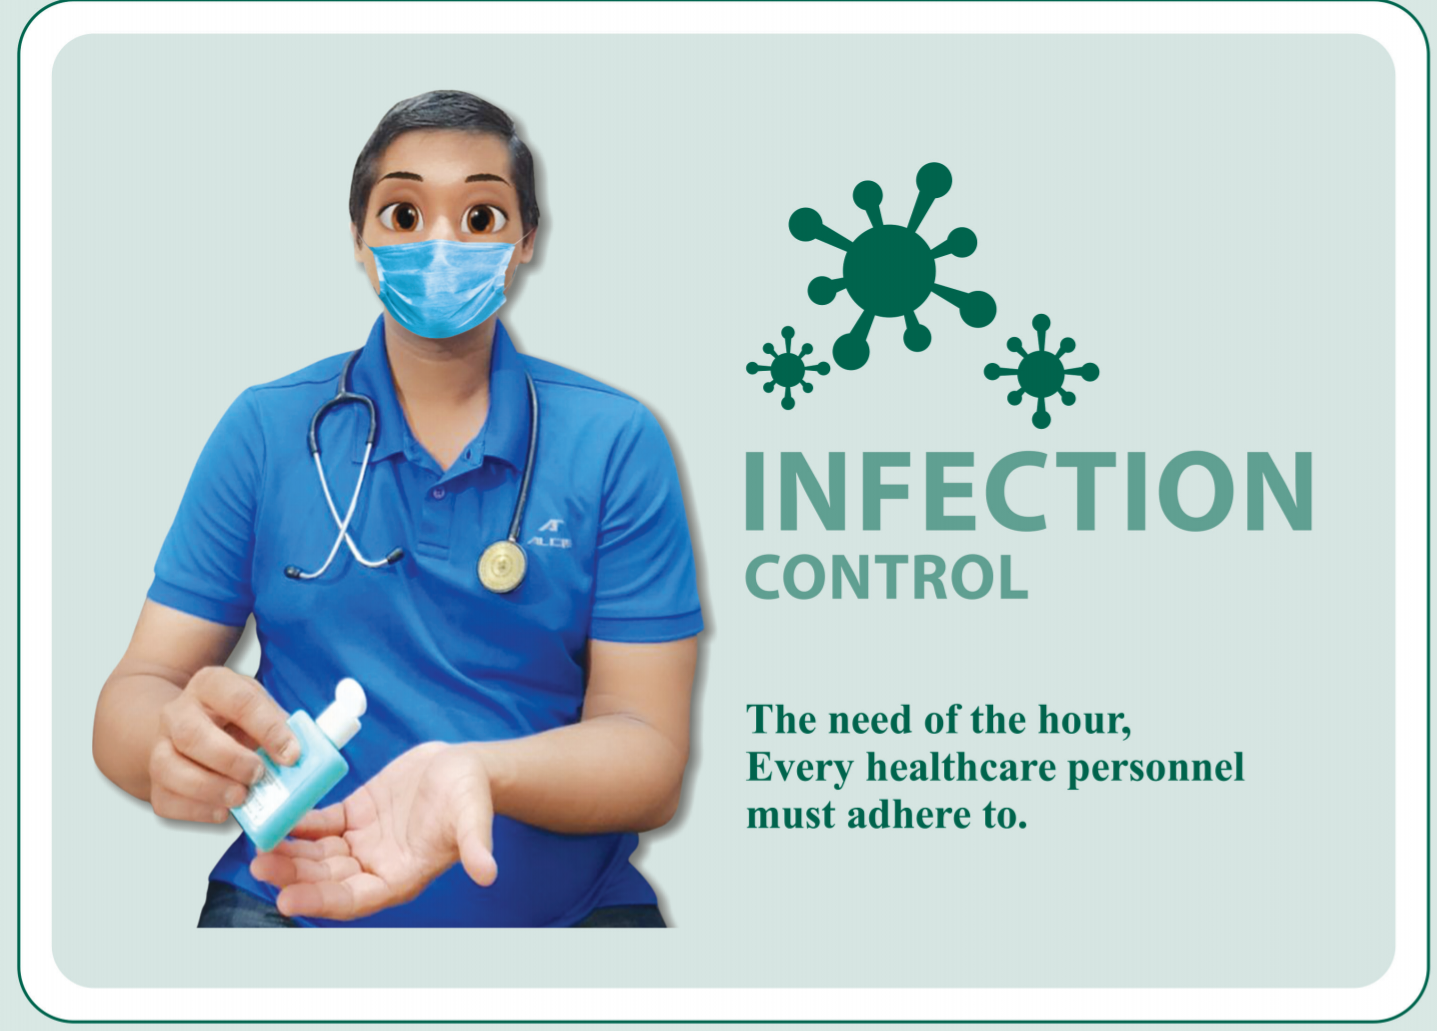 Hand hygiene: Back to the basics of infection control